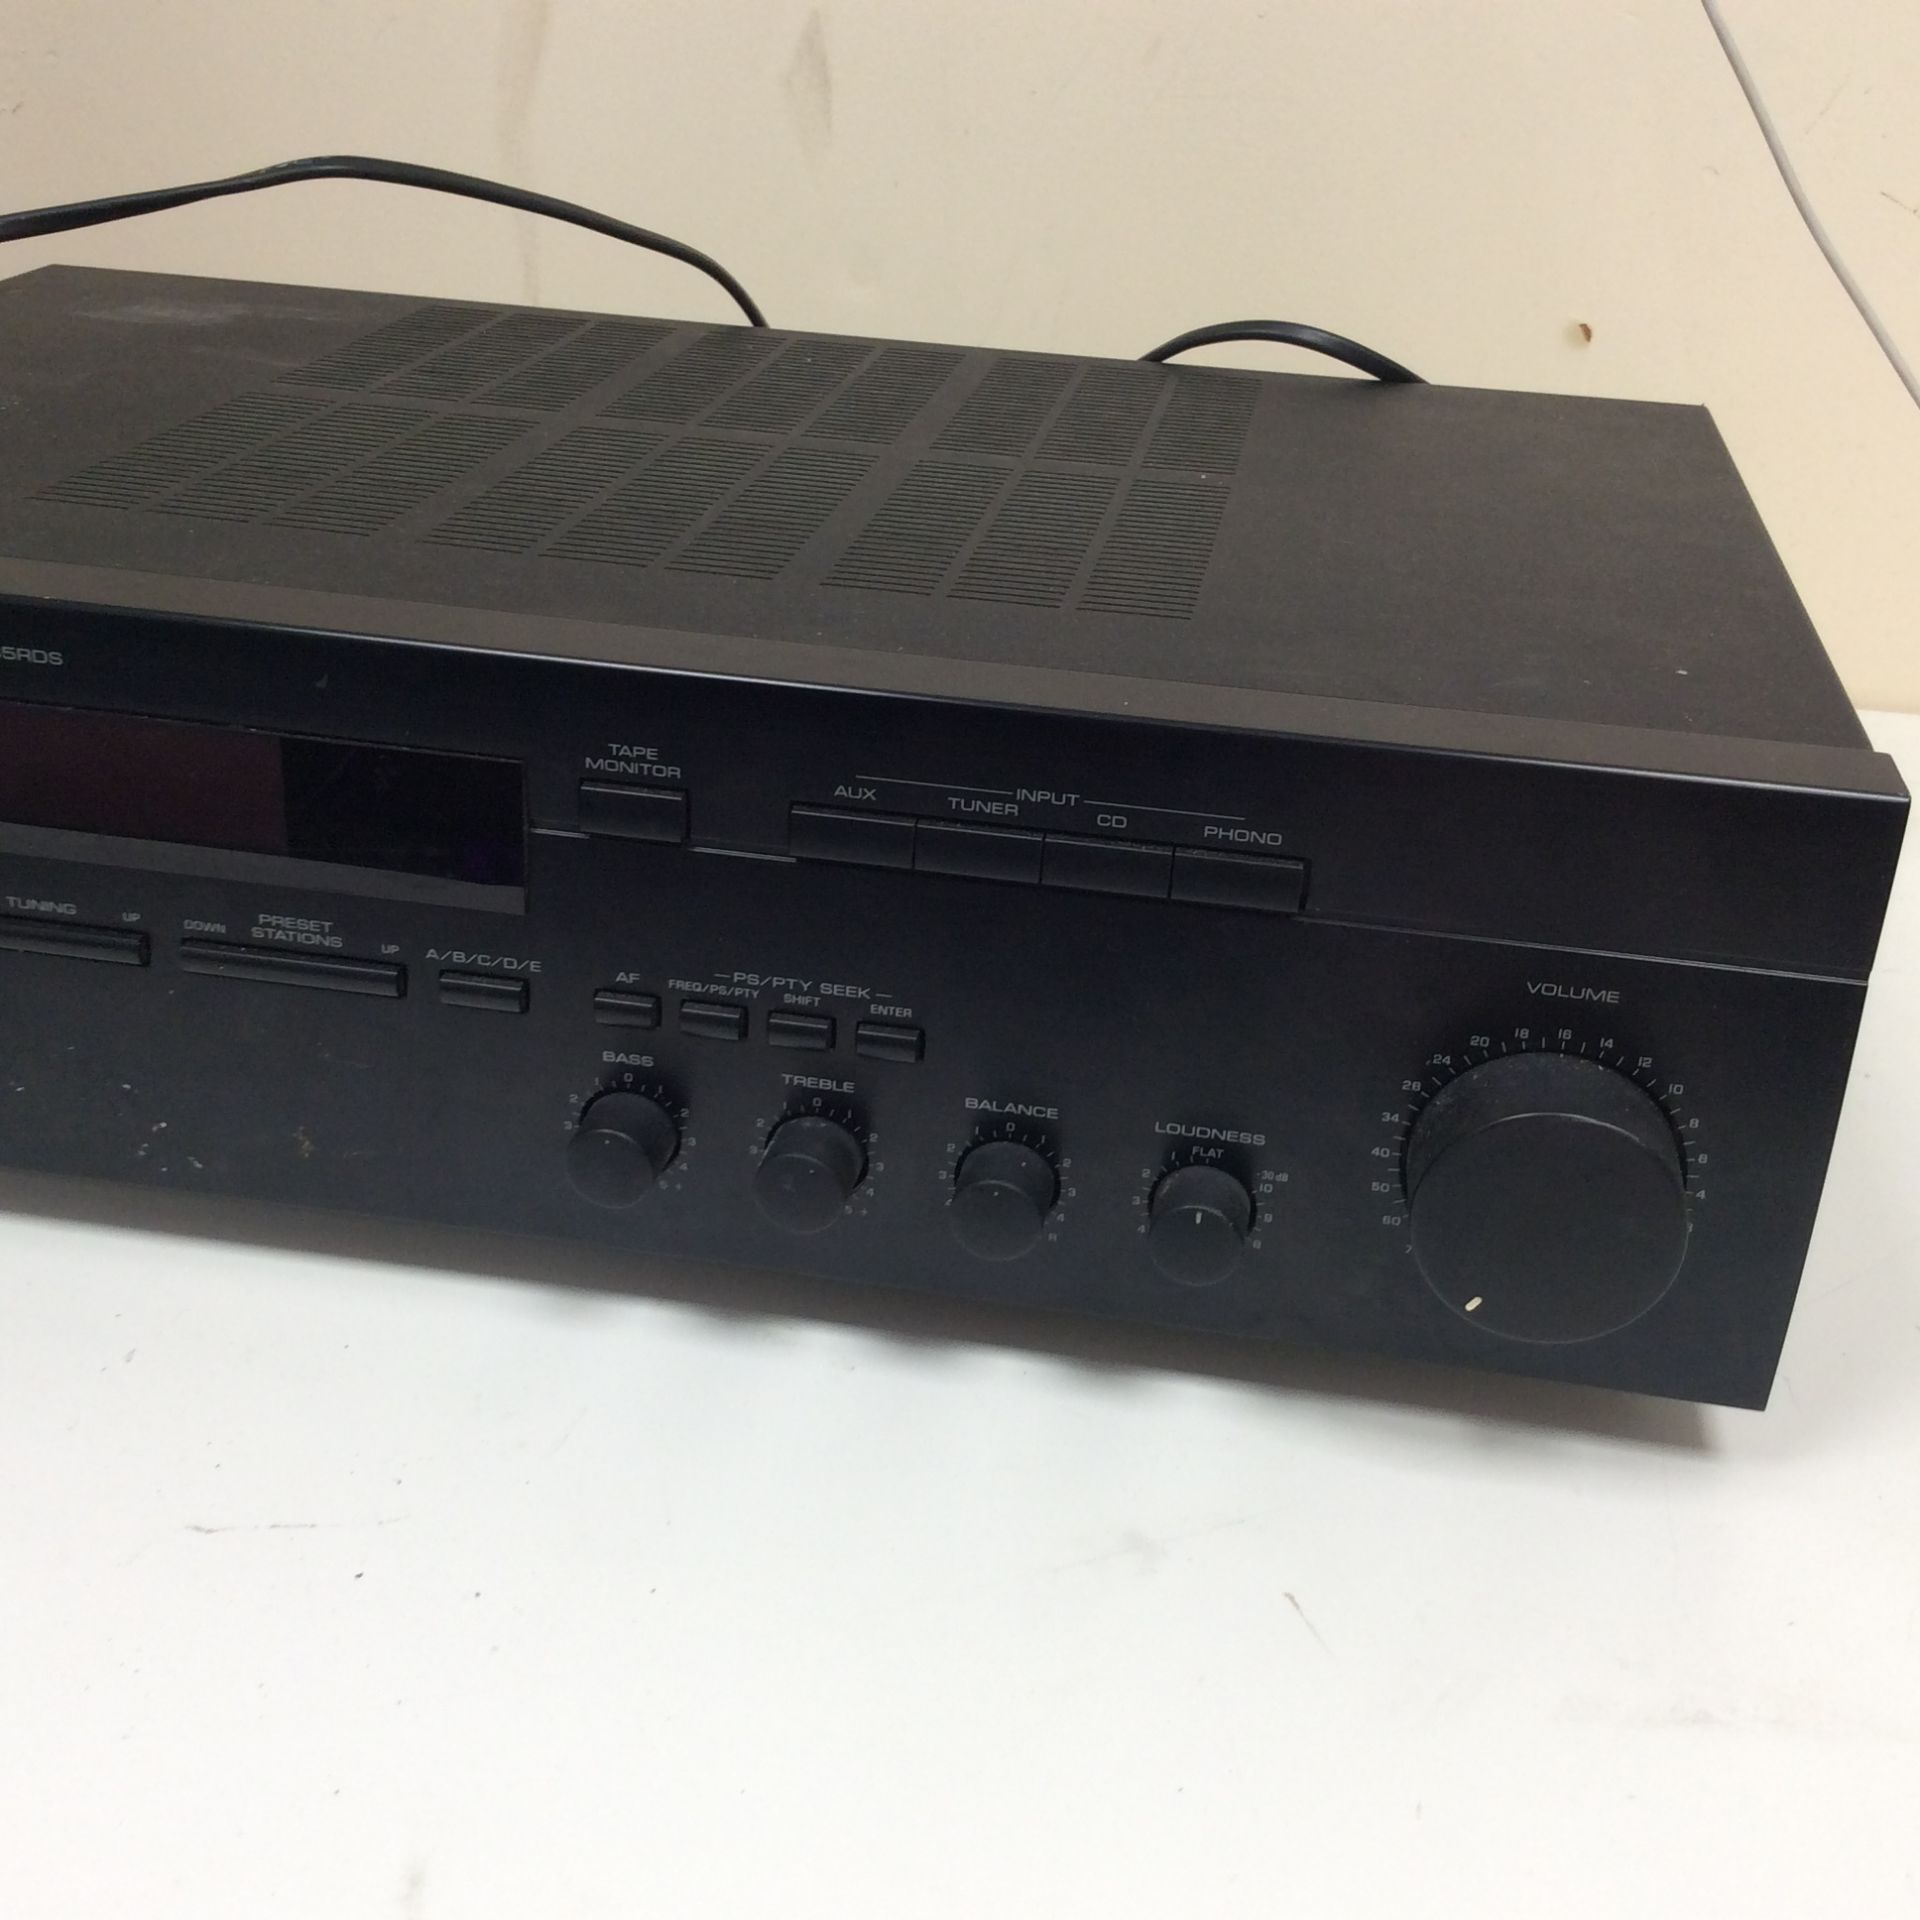 Yamaha natural sound stereo reciver - model rx-385rds - Image 3 of 4